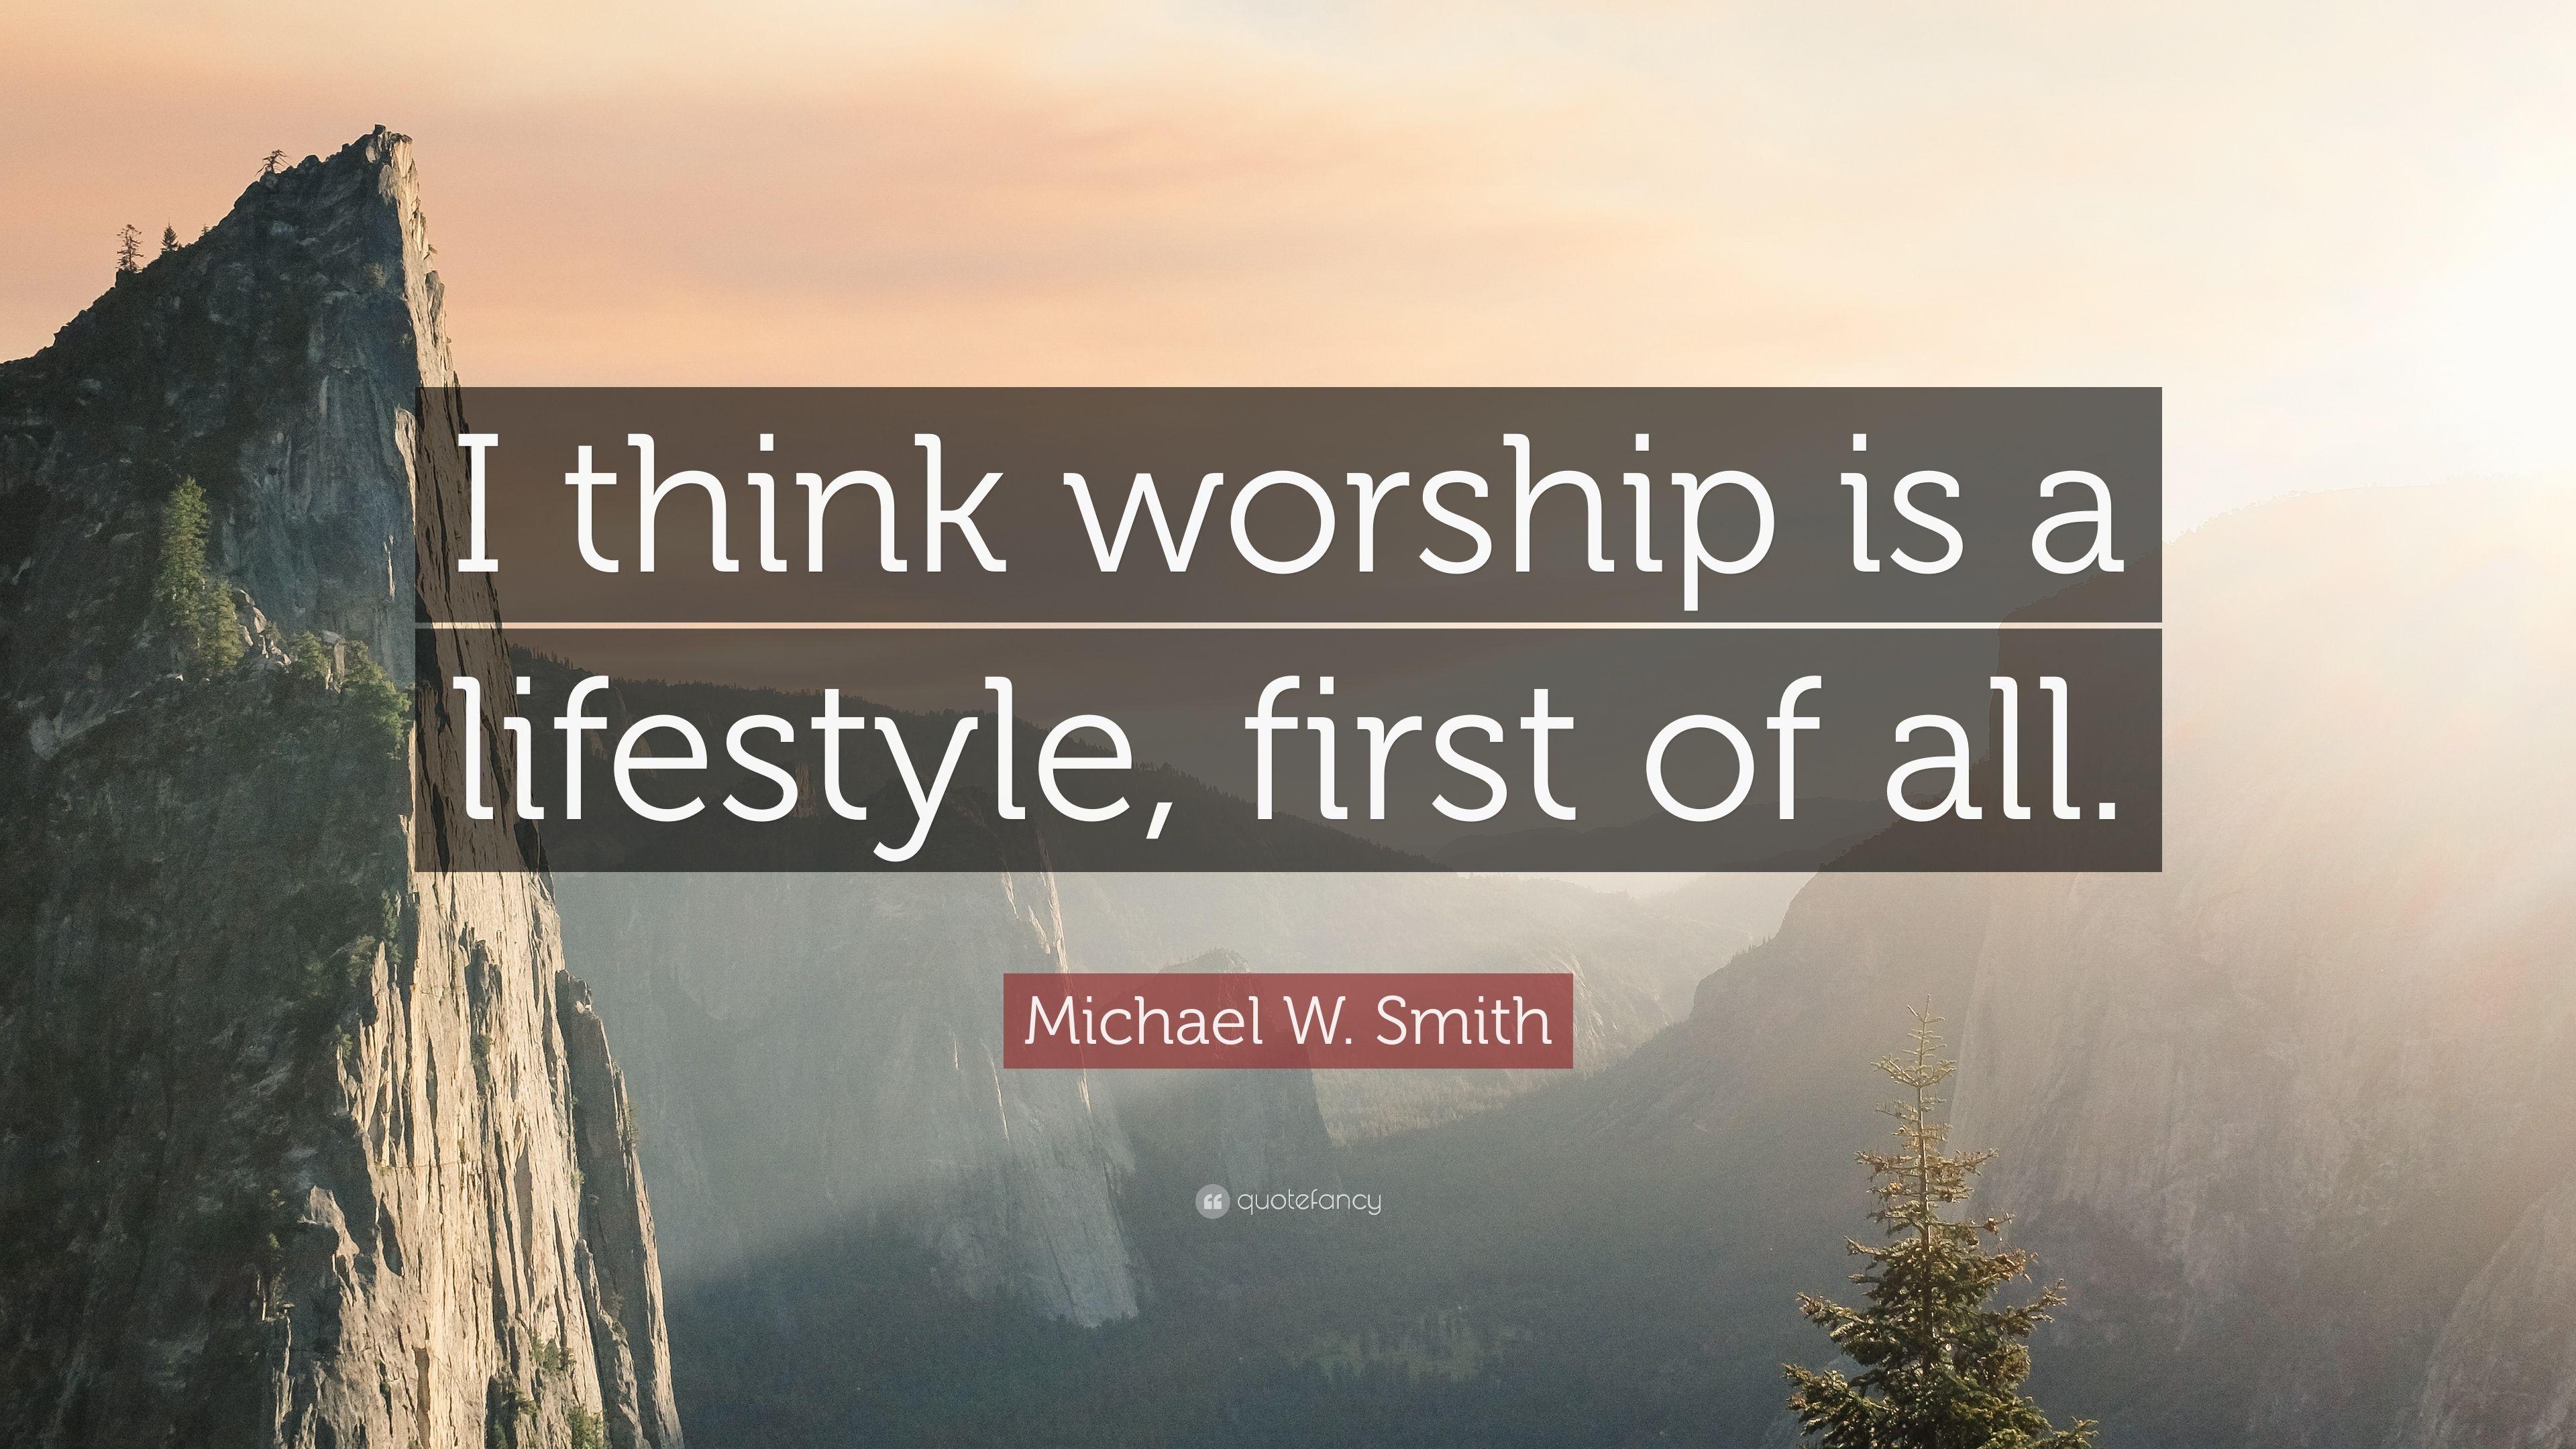 Michael W. Smith Quote: “I think worship is a lifestyle, first